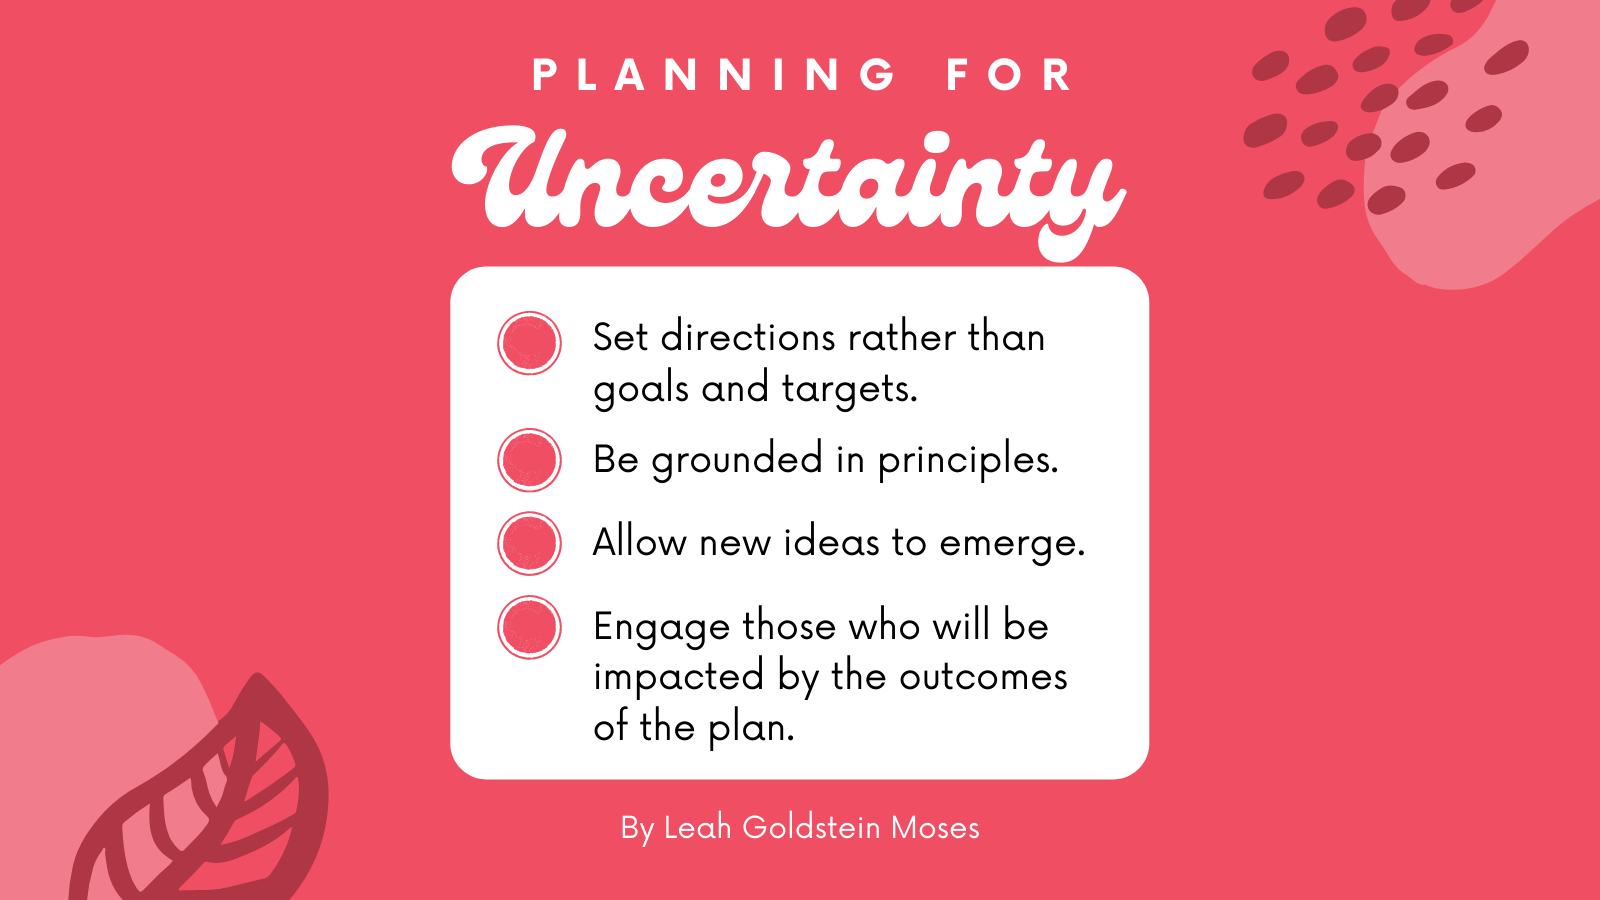 A graphic that lists actions you can take for planning for uncertainty: 1. Set directions rather than goals and targets; 2. Be grounded in principles; 3. Allow new ideas to emerge; 4. Engage those who will be impacted by the outcomes of the plan.